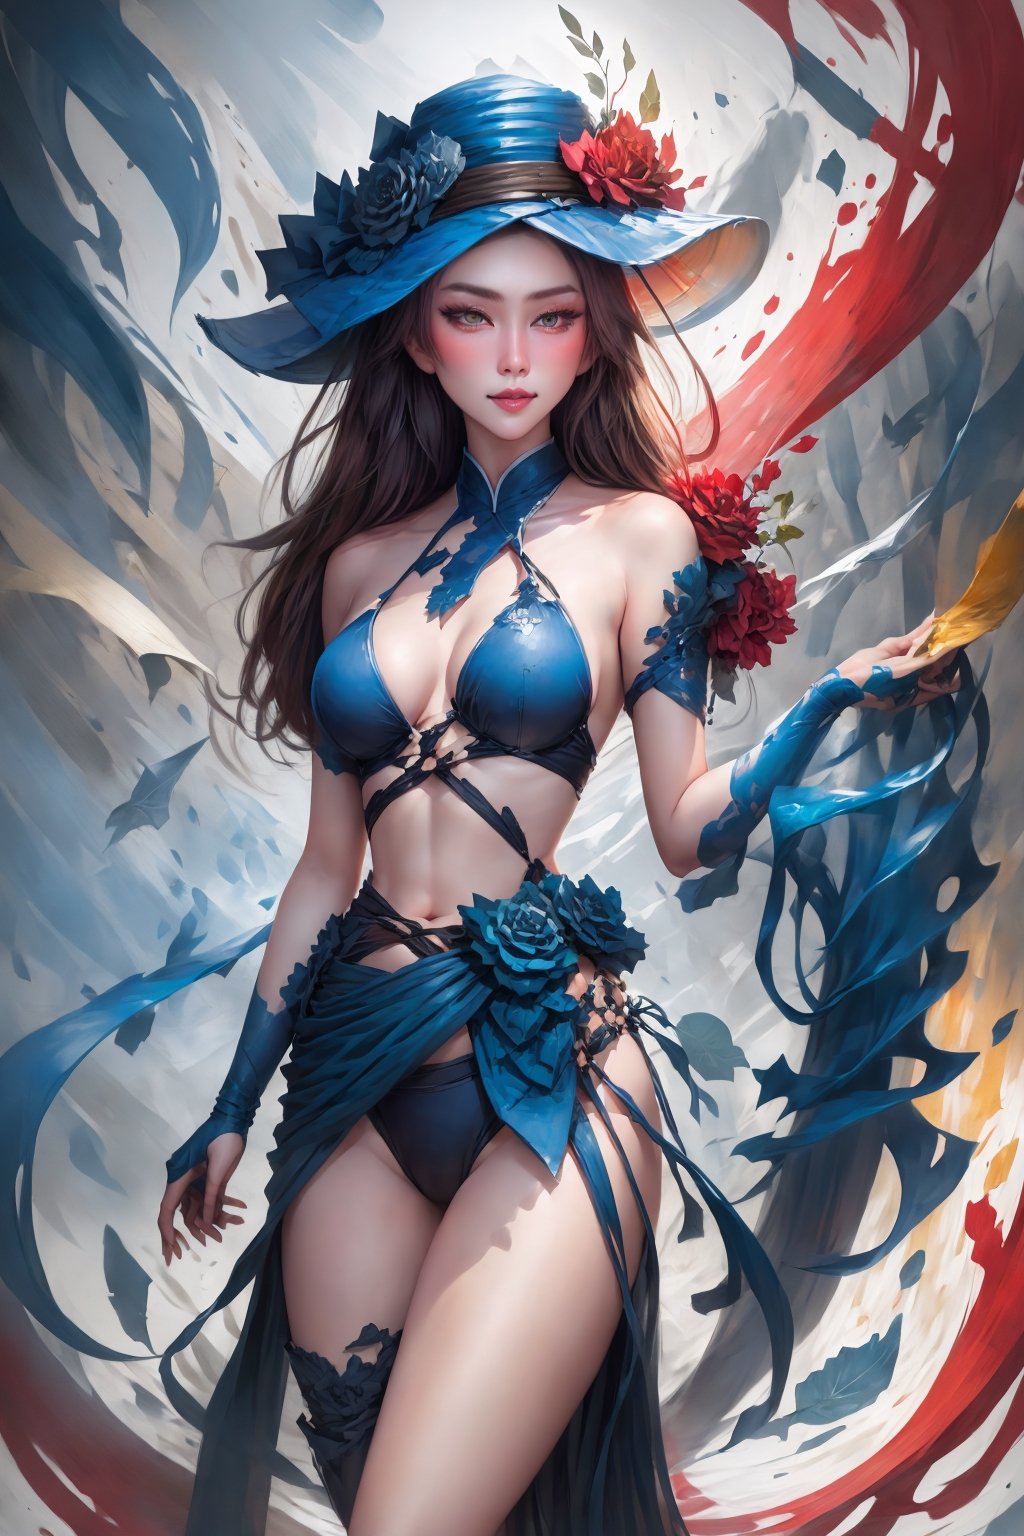 Create a detailed close-up illustration that captures the essence of a character wearing a hat, inspired by Playboy, fantasy artwork and the aesthetic of a bikini, abstract, Enhanced, NDP, Miss Vietnamese girls are attractive and moving